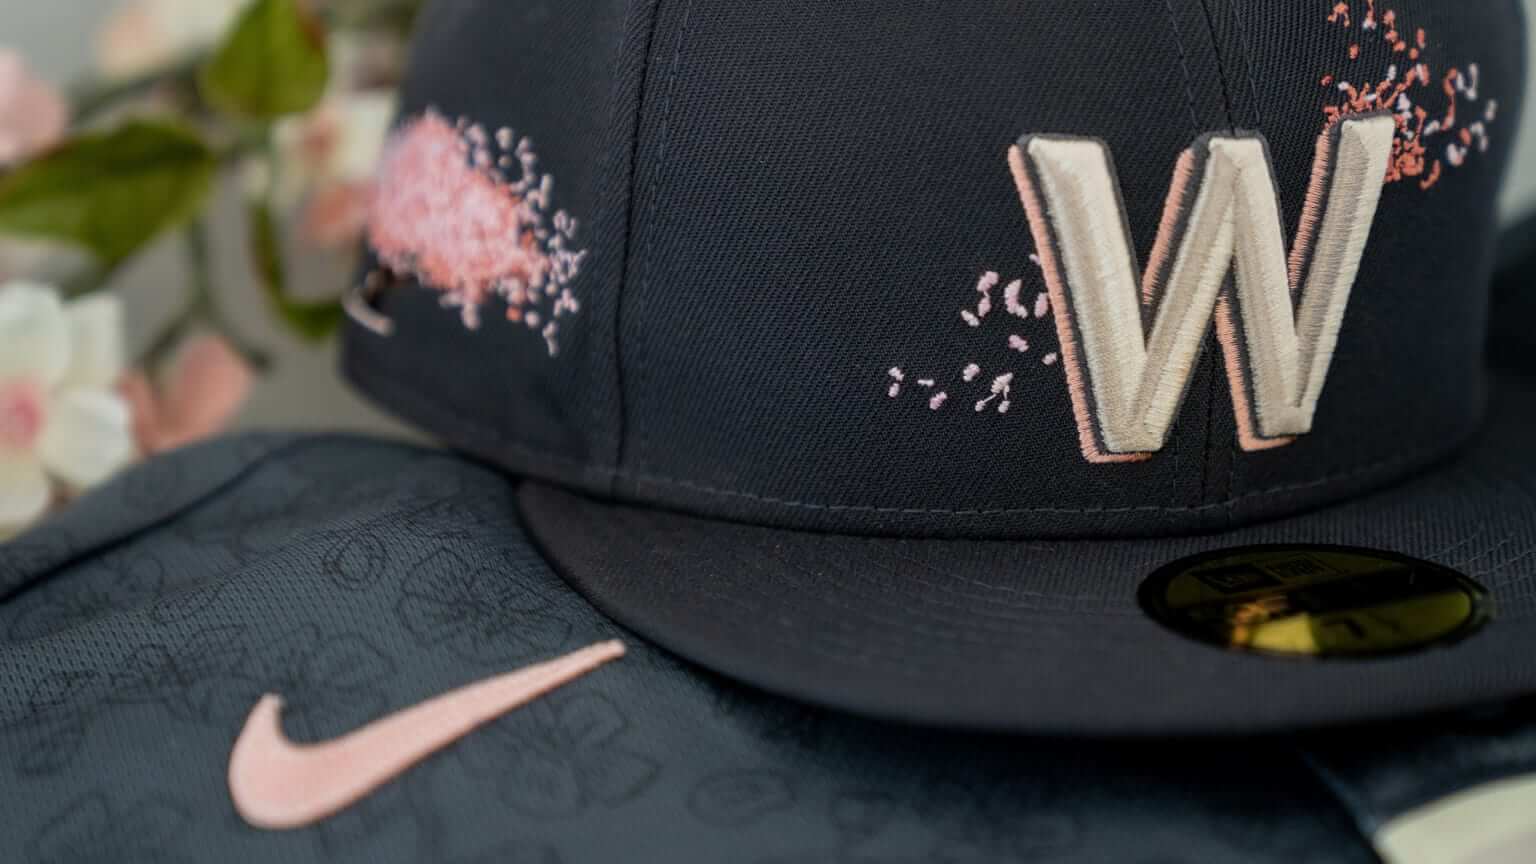 Wizards unveil cherry blossom inspired collections and designs